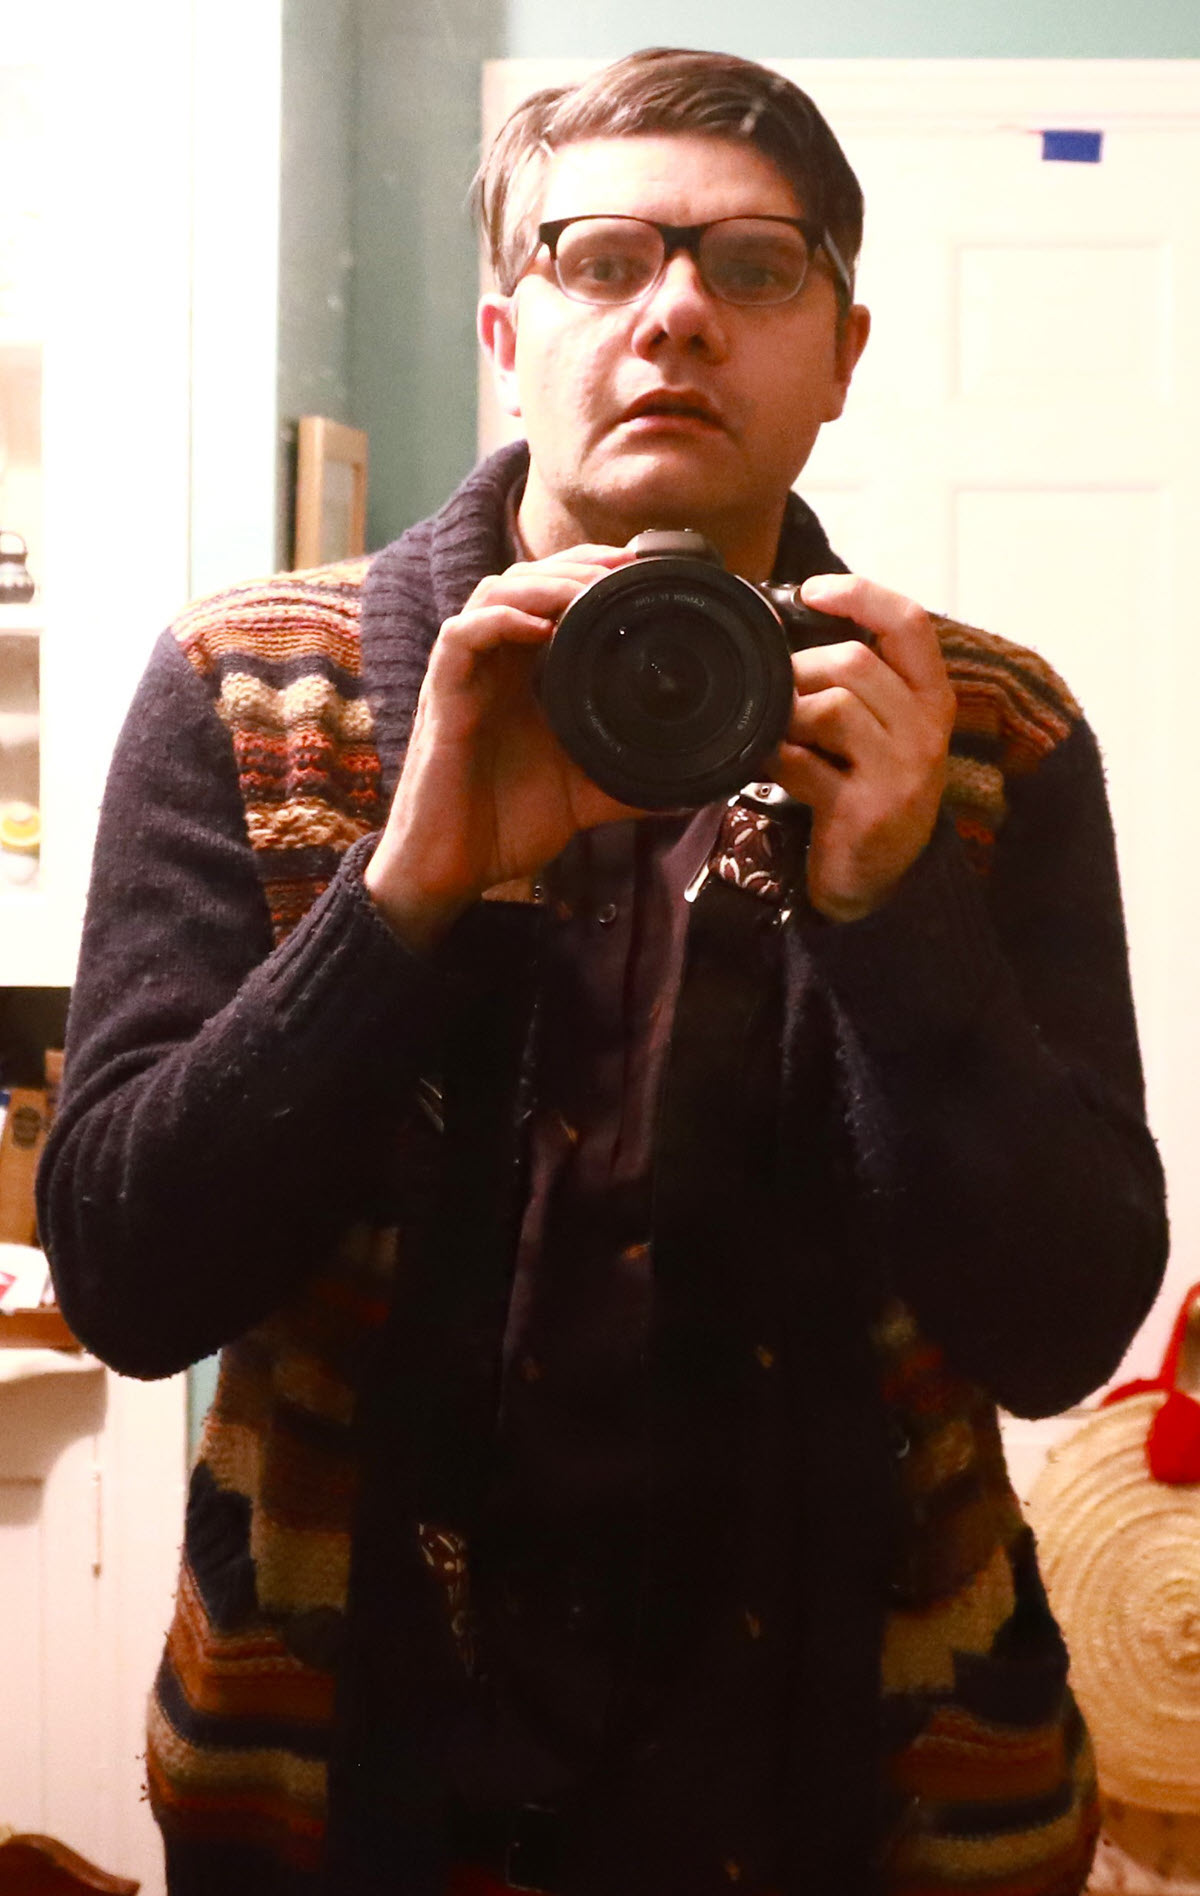 Man in glasses holding a camera. Appears to be taking this picture of himself via a mirror.